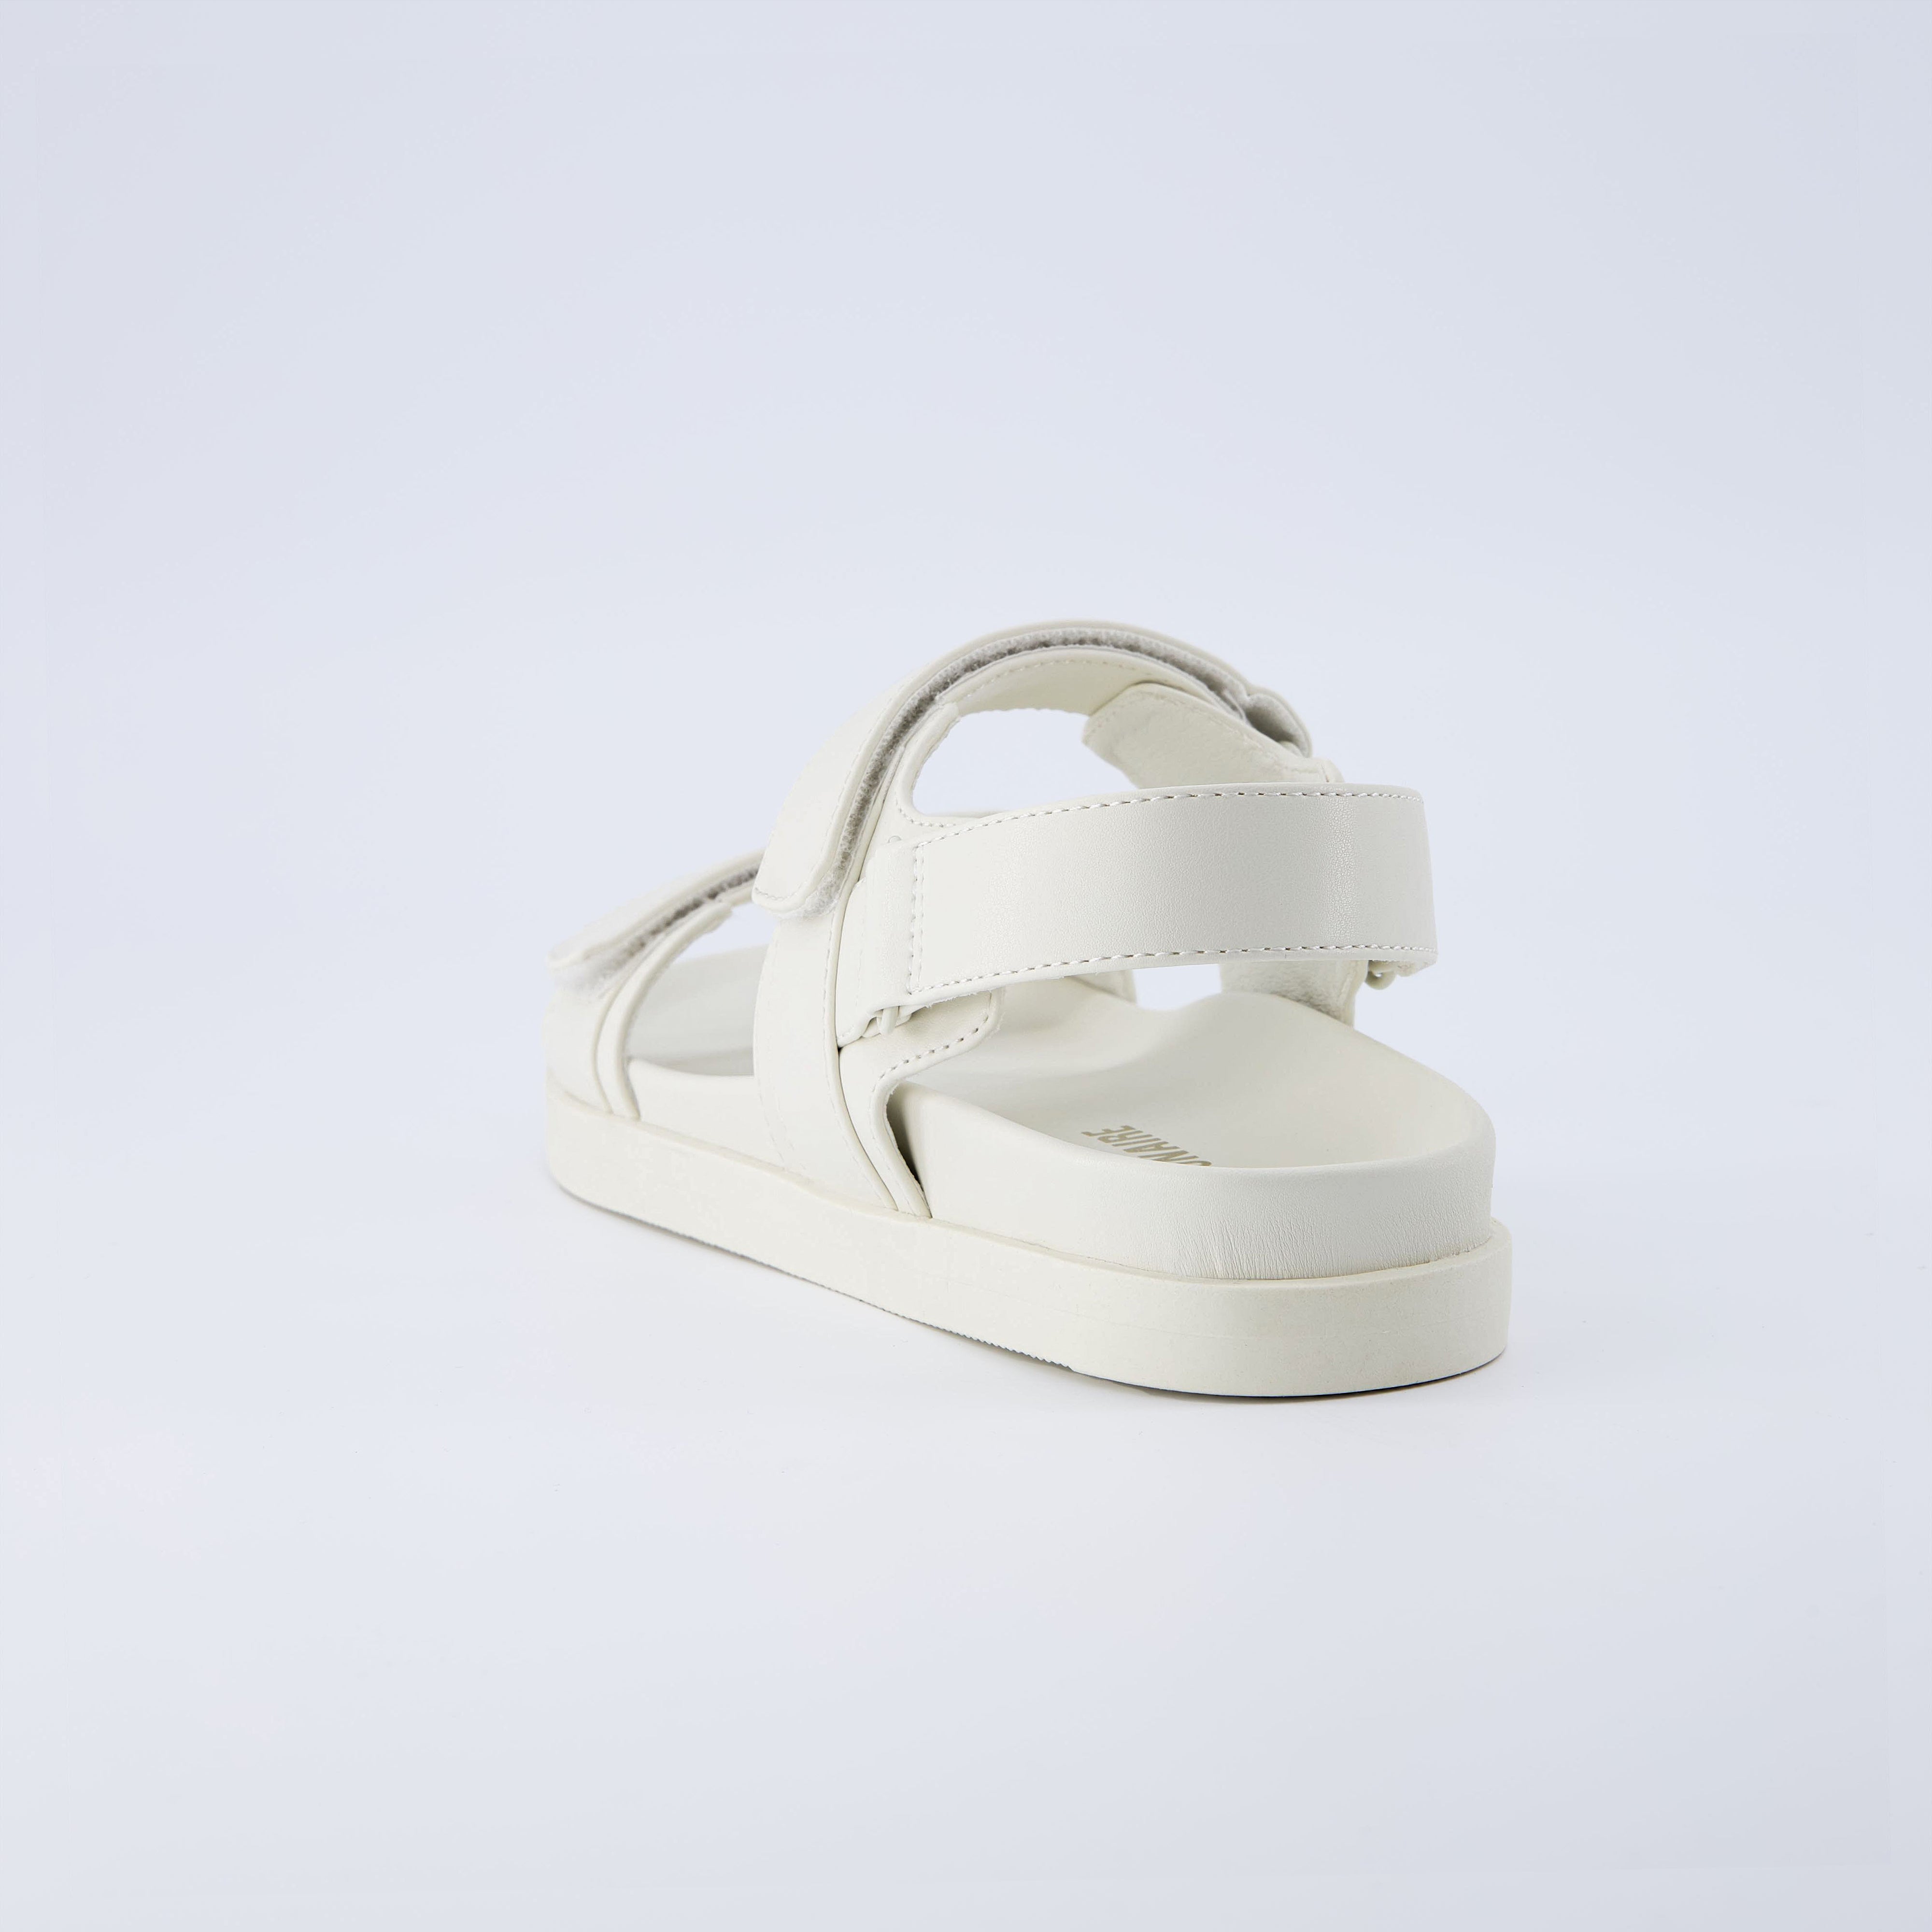 Extra Footbed Sandal